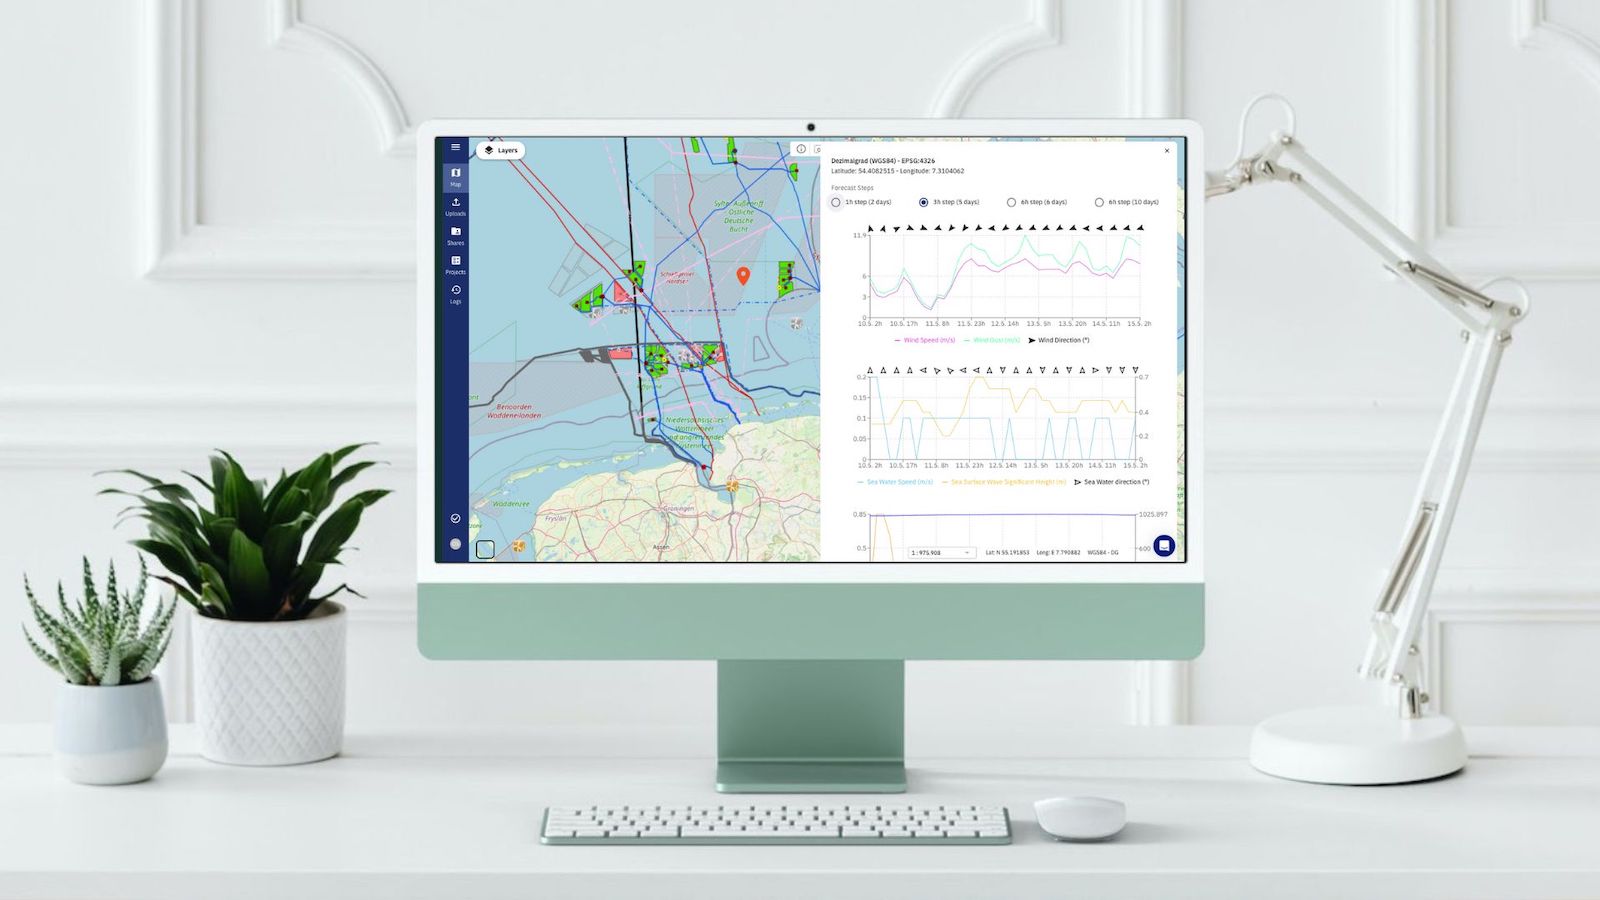 TrueOcean Now Provides Native Access to MetOcean Data from Spire